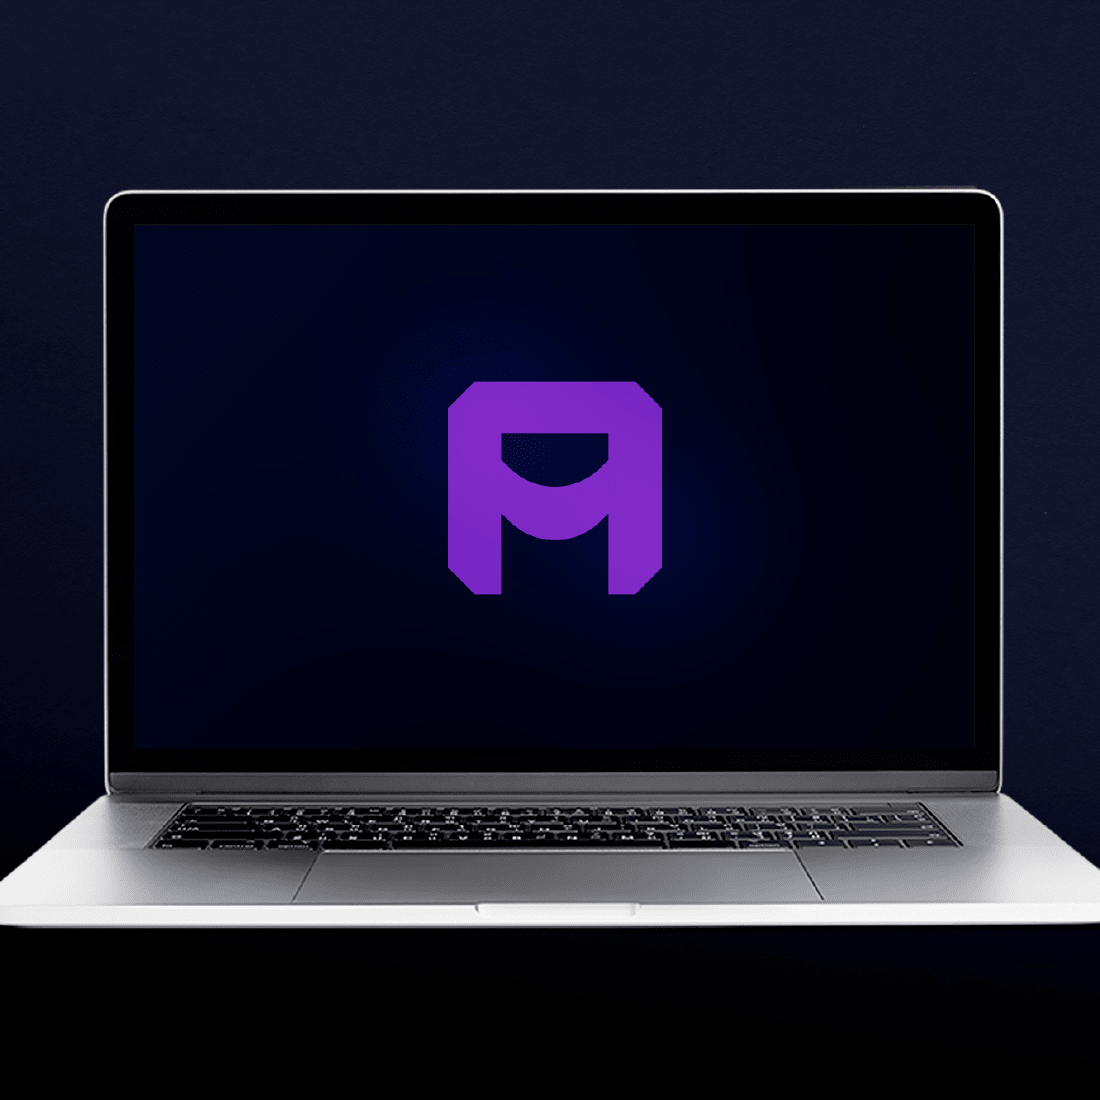 Laptop display with a purple letter logo.